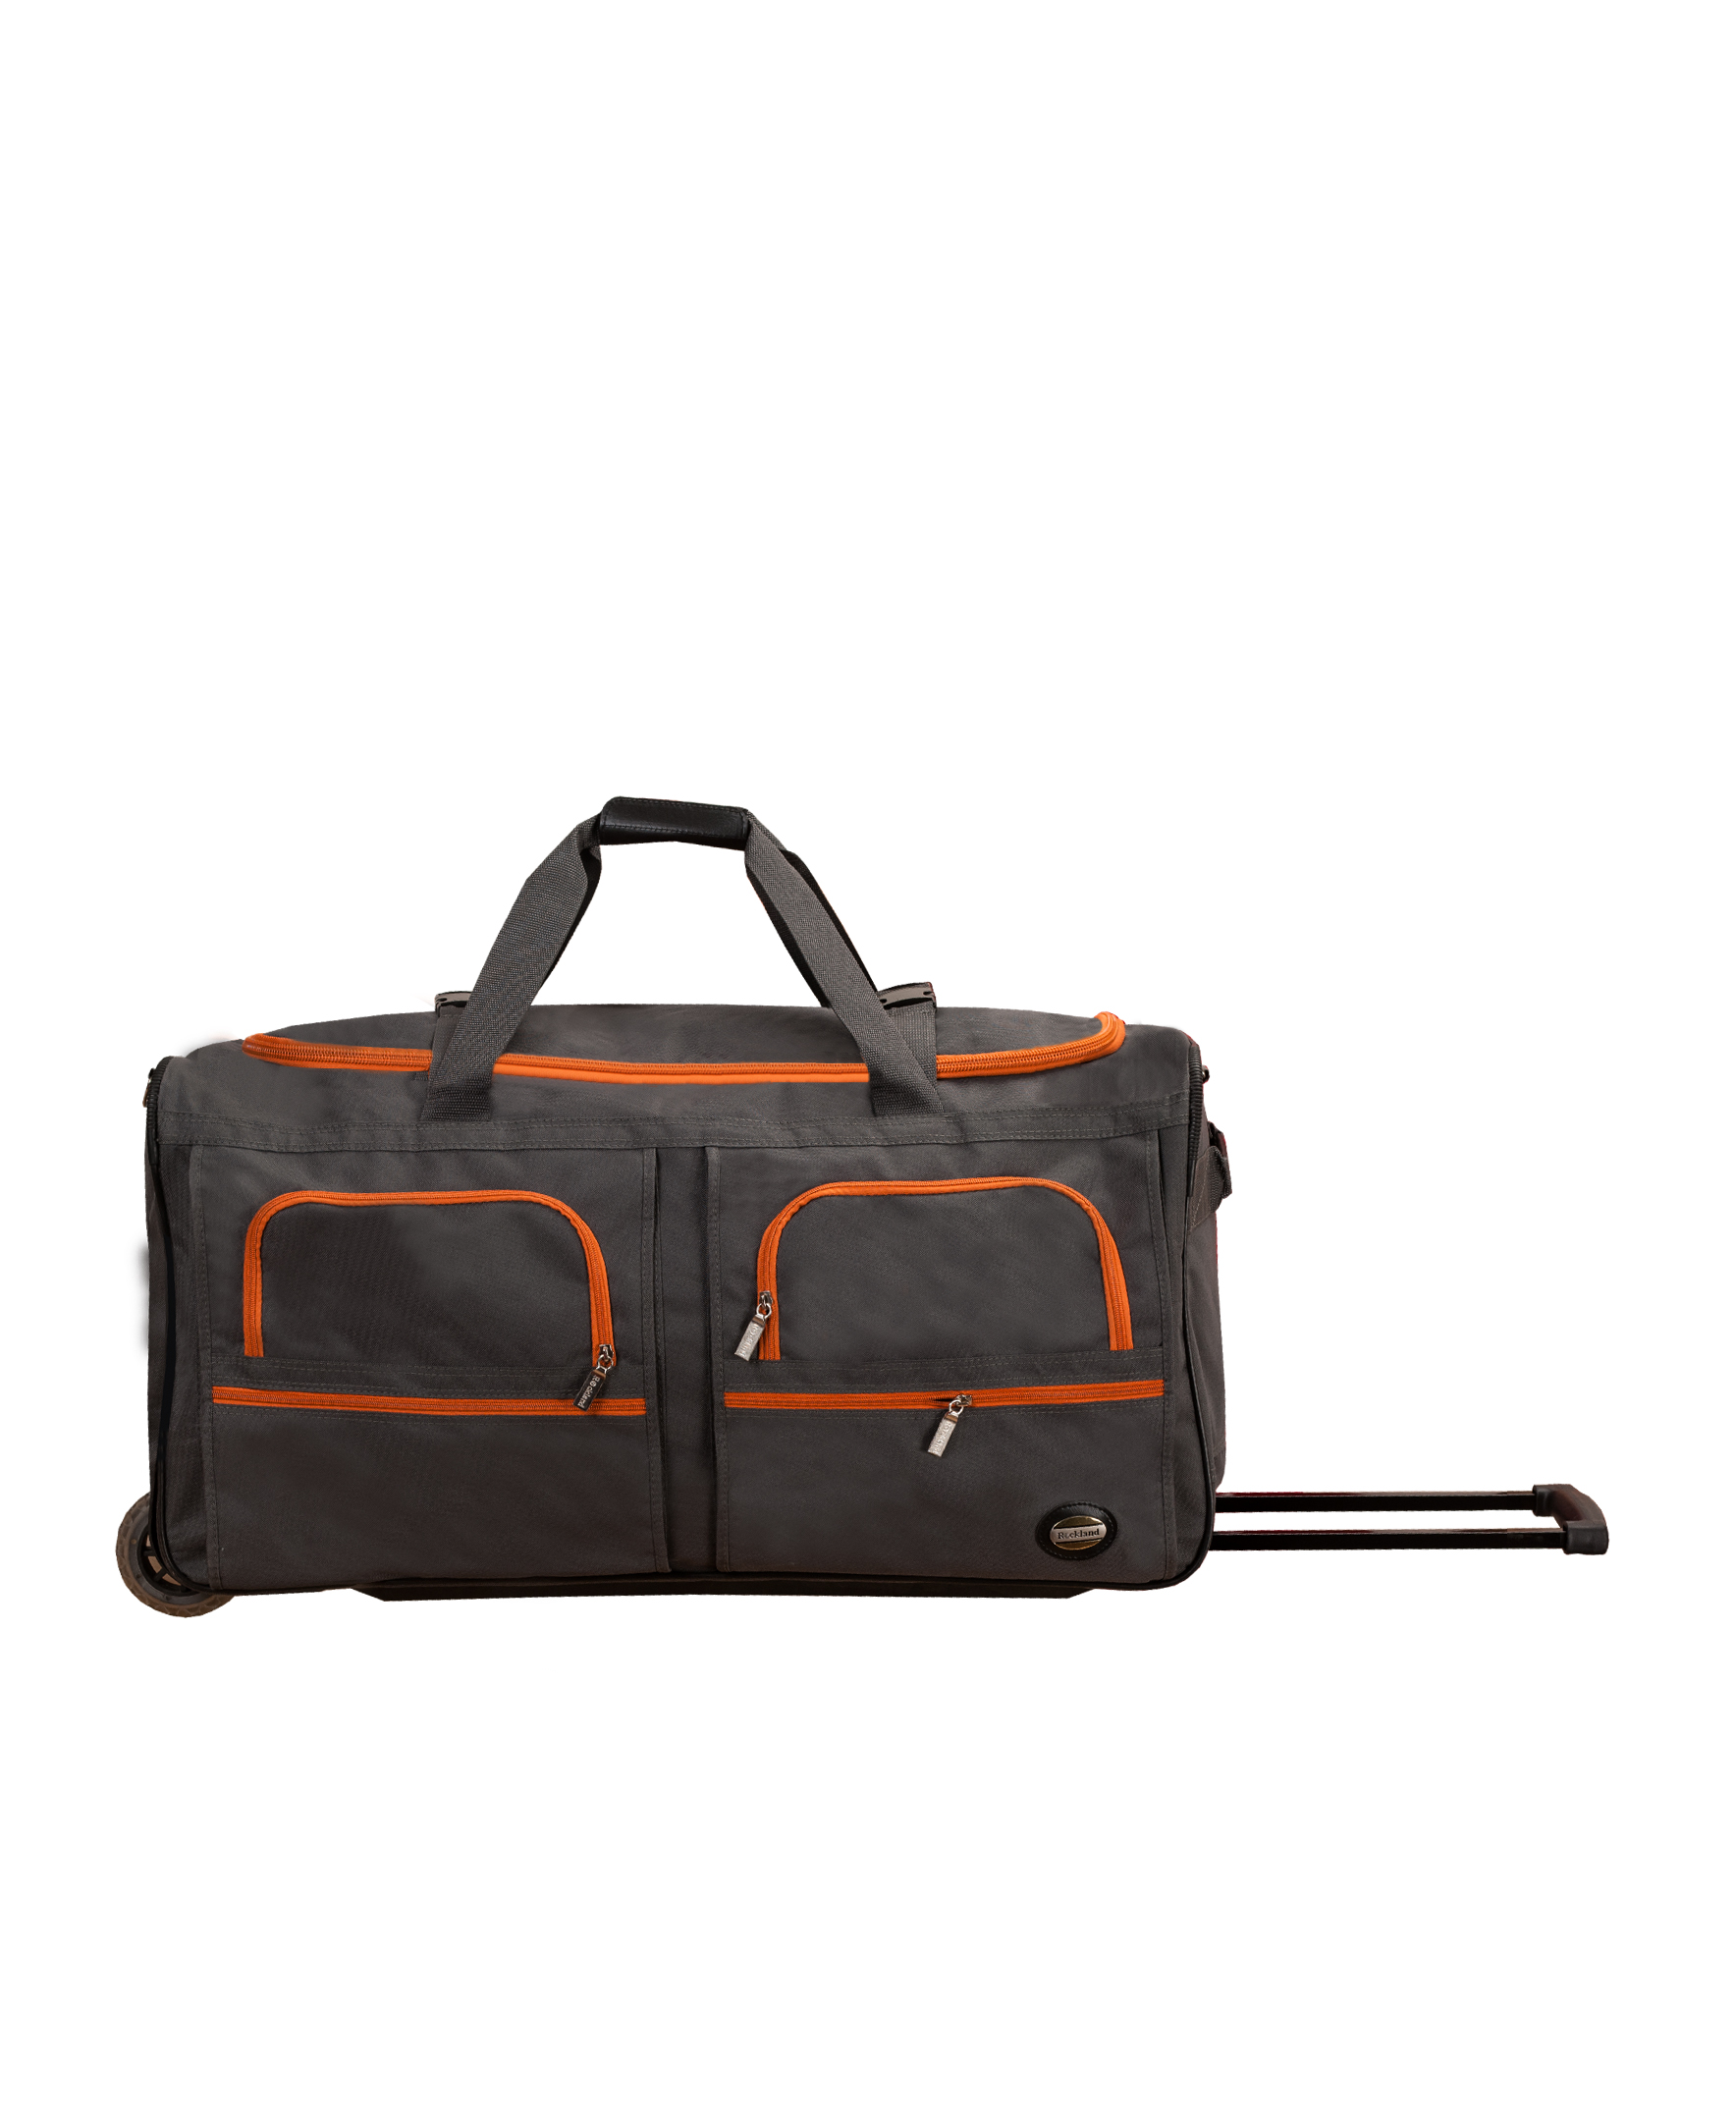 Rockland Luggage 30" Rolling Duffle Bag PRD330 - image 1 of 5